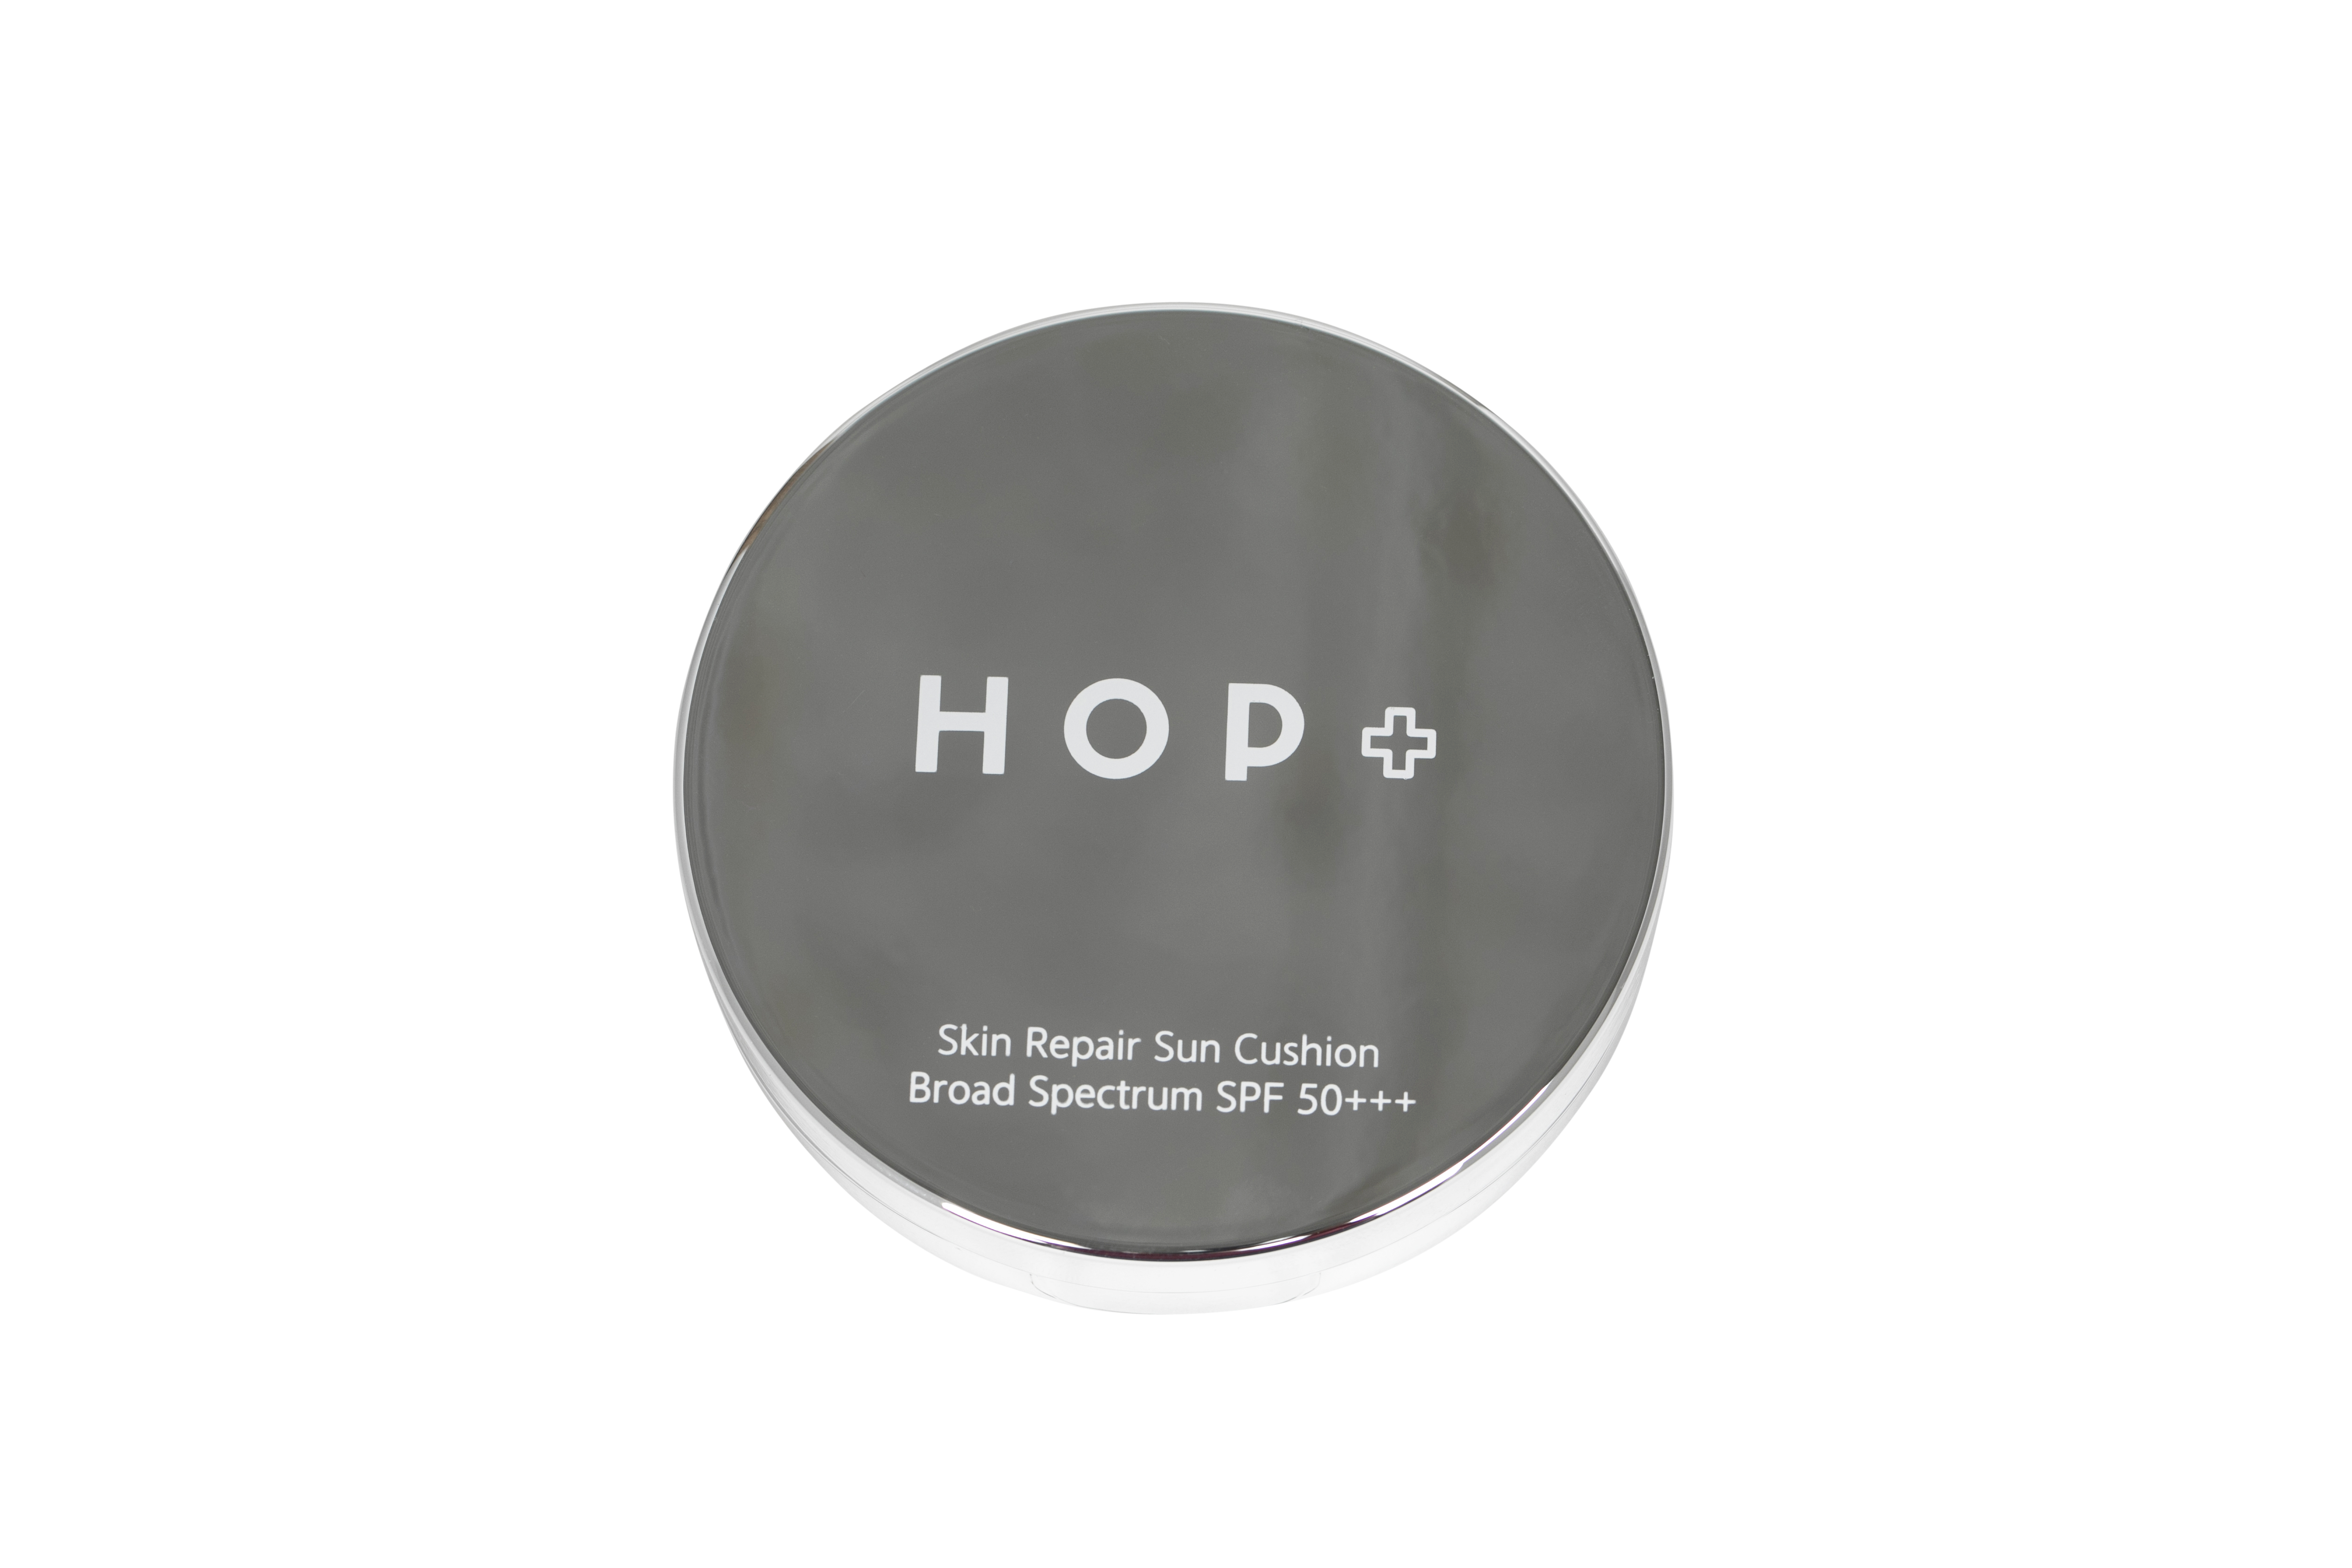 HOUSE OF PLLA® HOP+ Skin Repair Cushion Sunscreen Retail $52 - SPECIAL OFFER